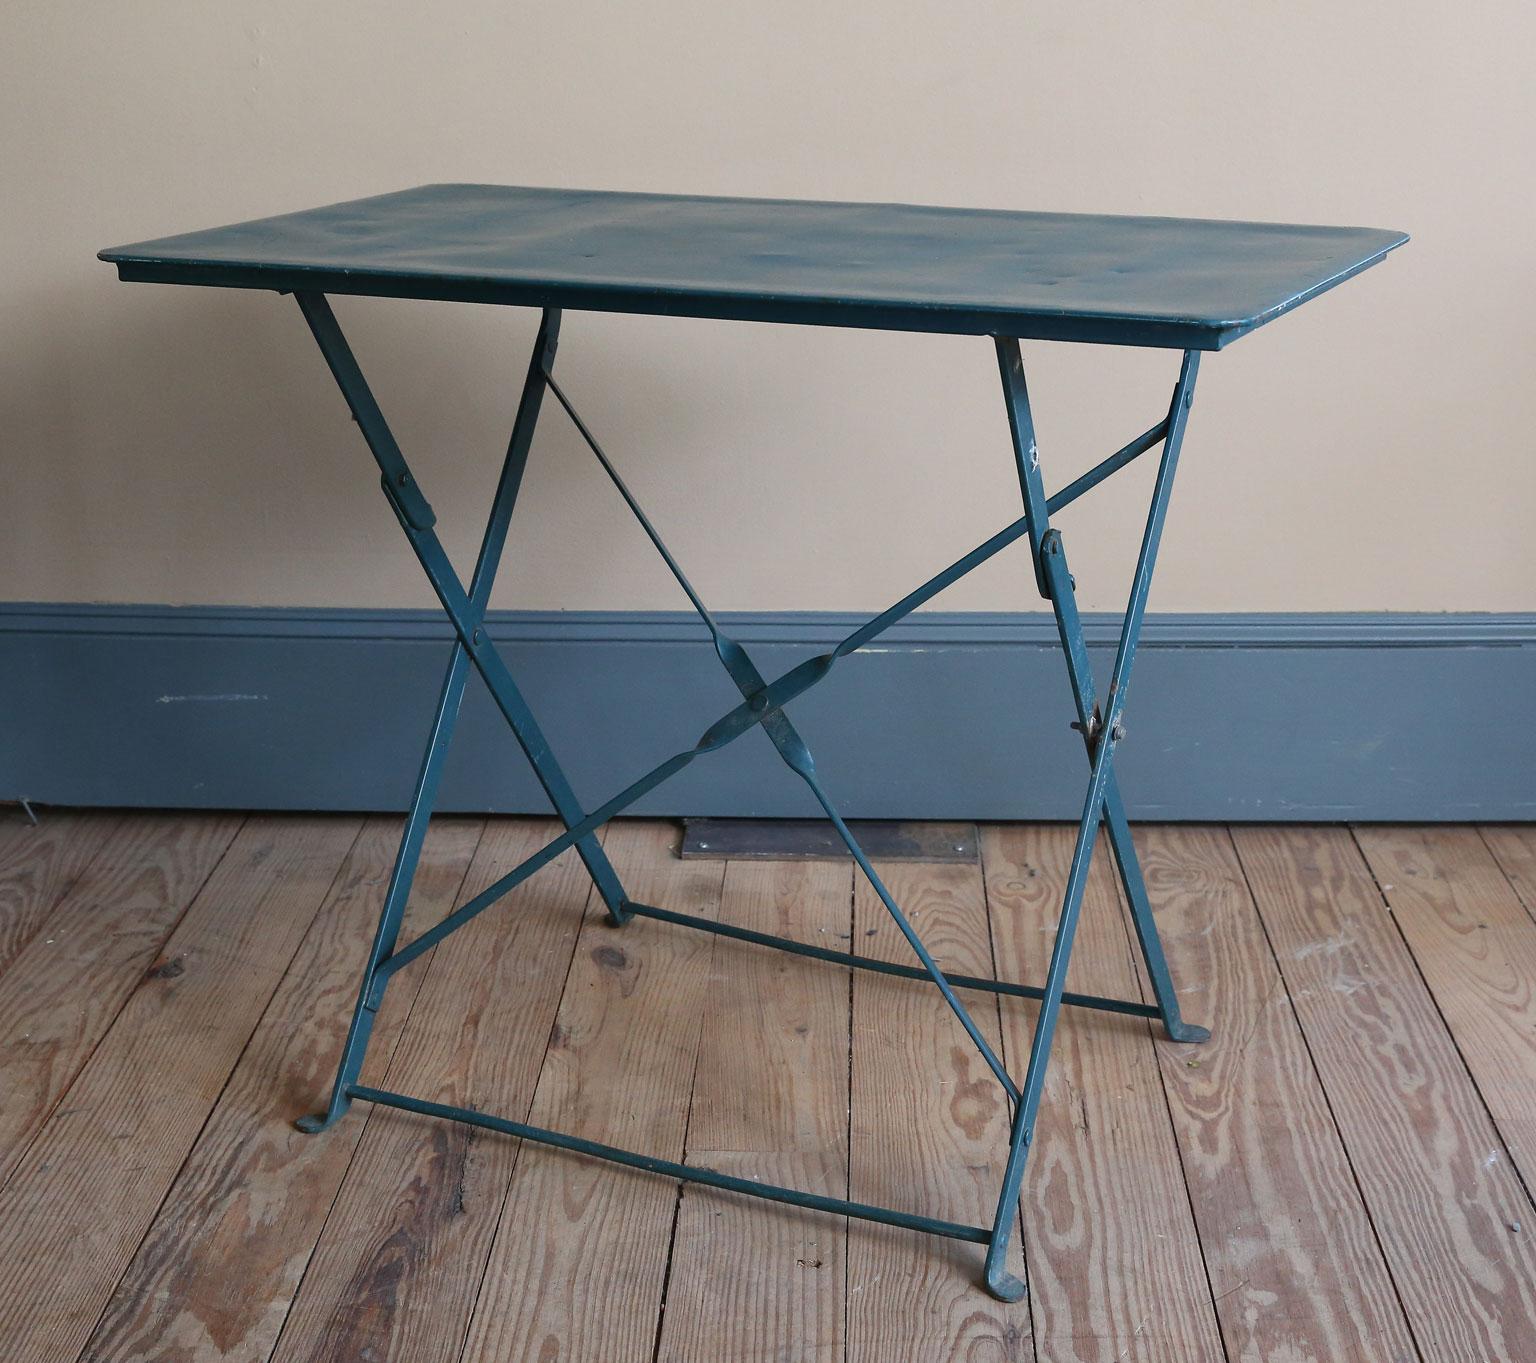 The table has been painted at some time in its life. We have two of them. They are folding tables that are of nice, heavy quality. These tables could be used as a small desk, as a side table, as a serving table, etc. They are kind of nice because